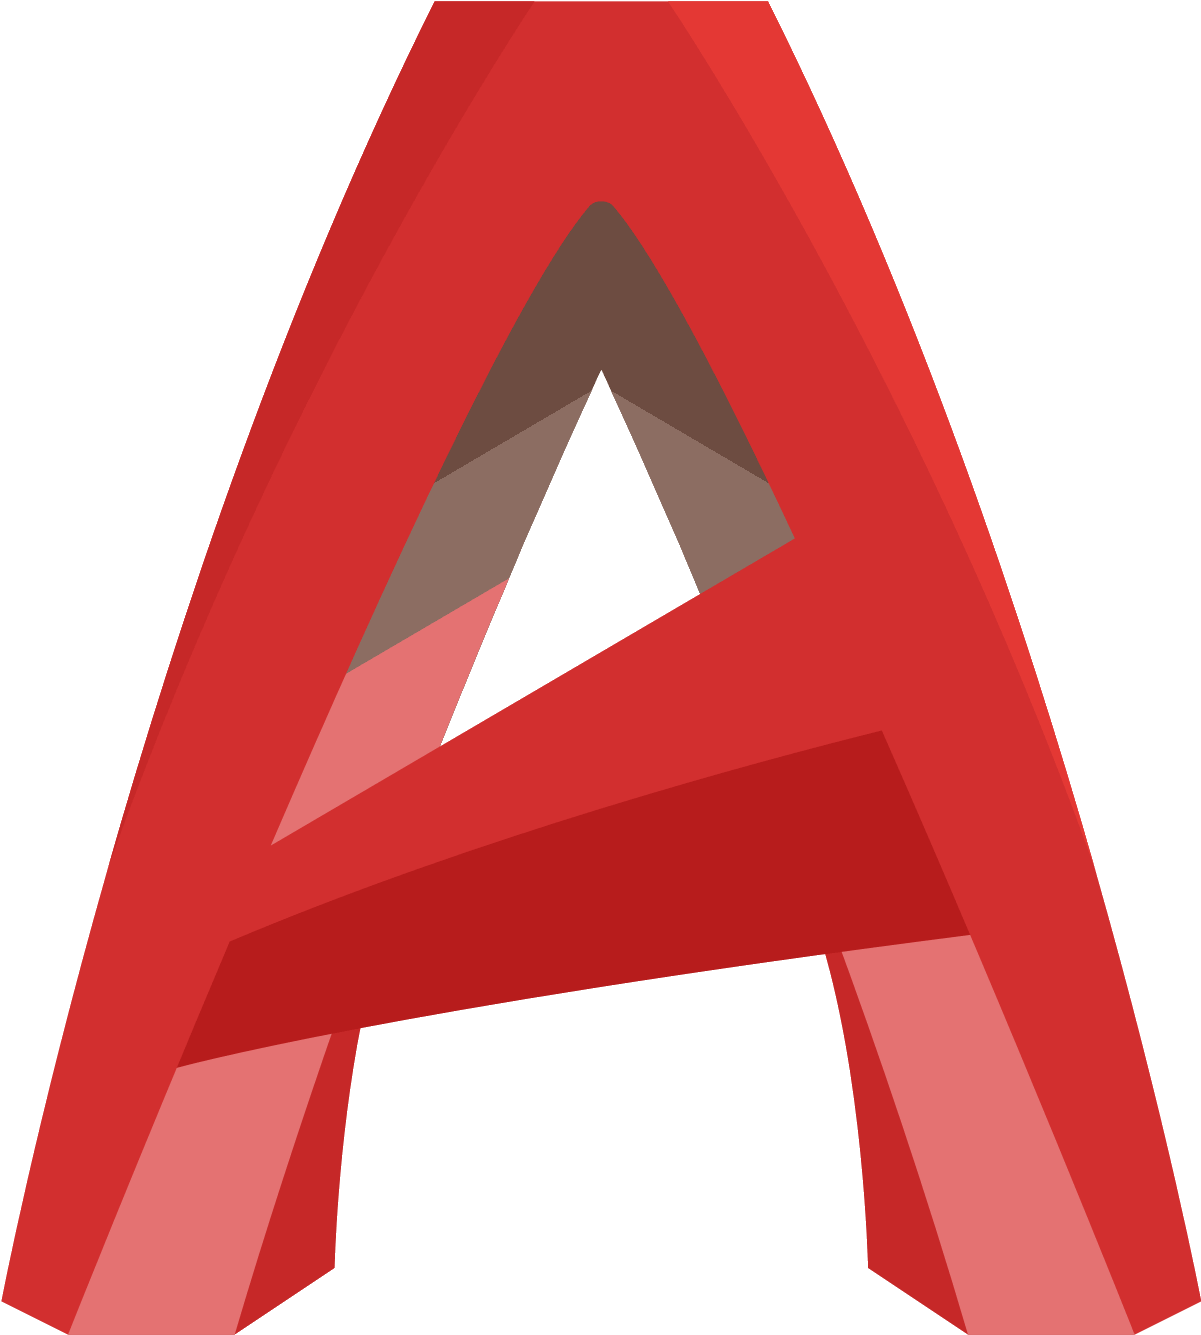 A Red Letter A With A Black Background